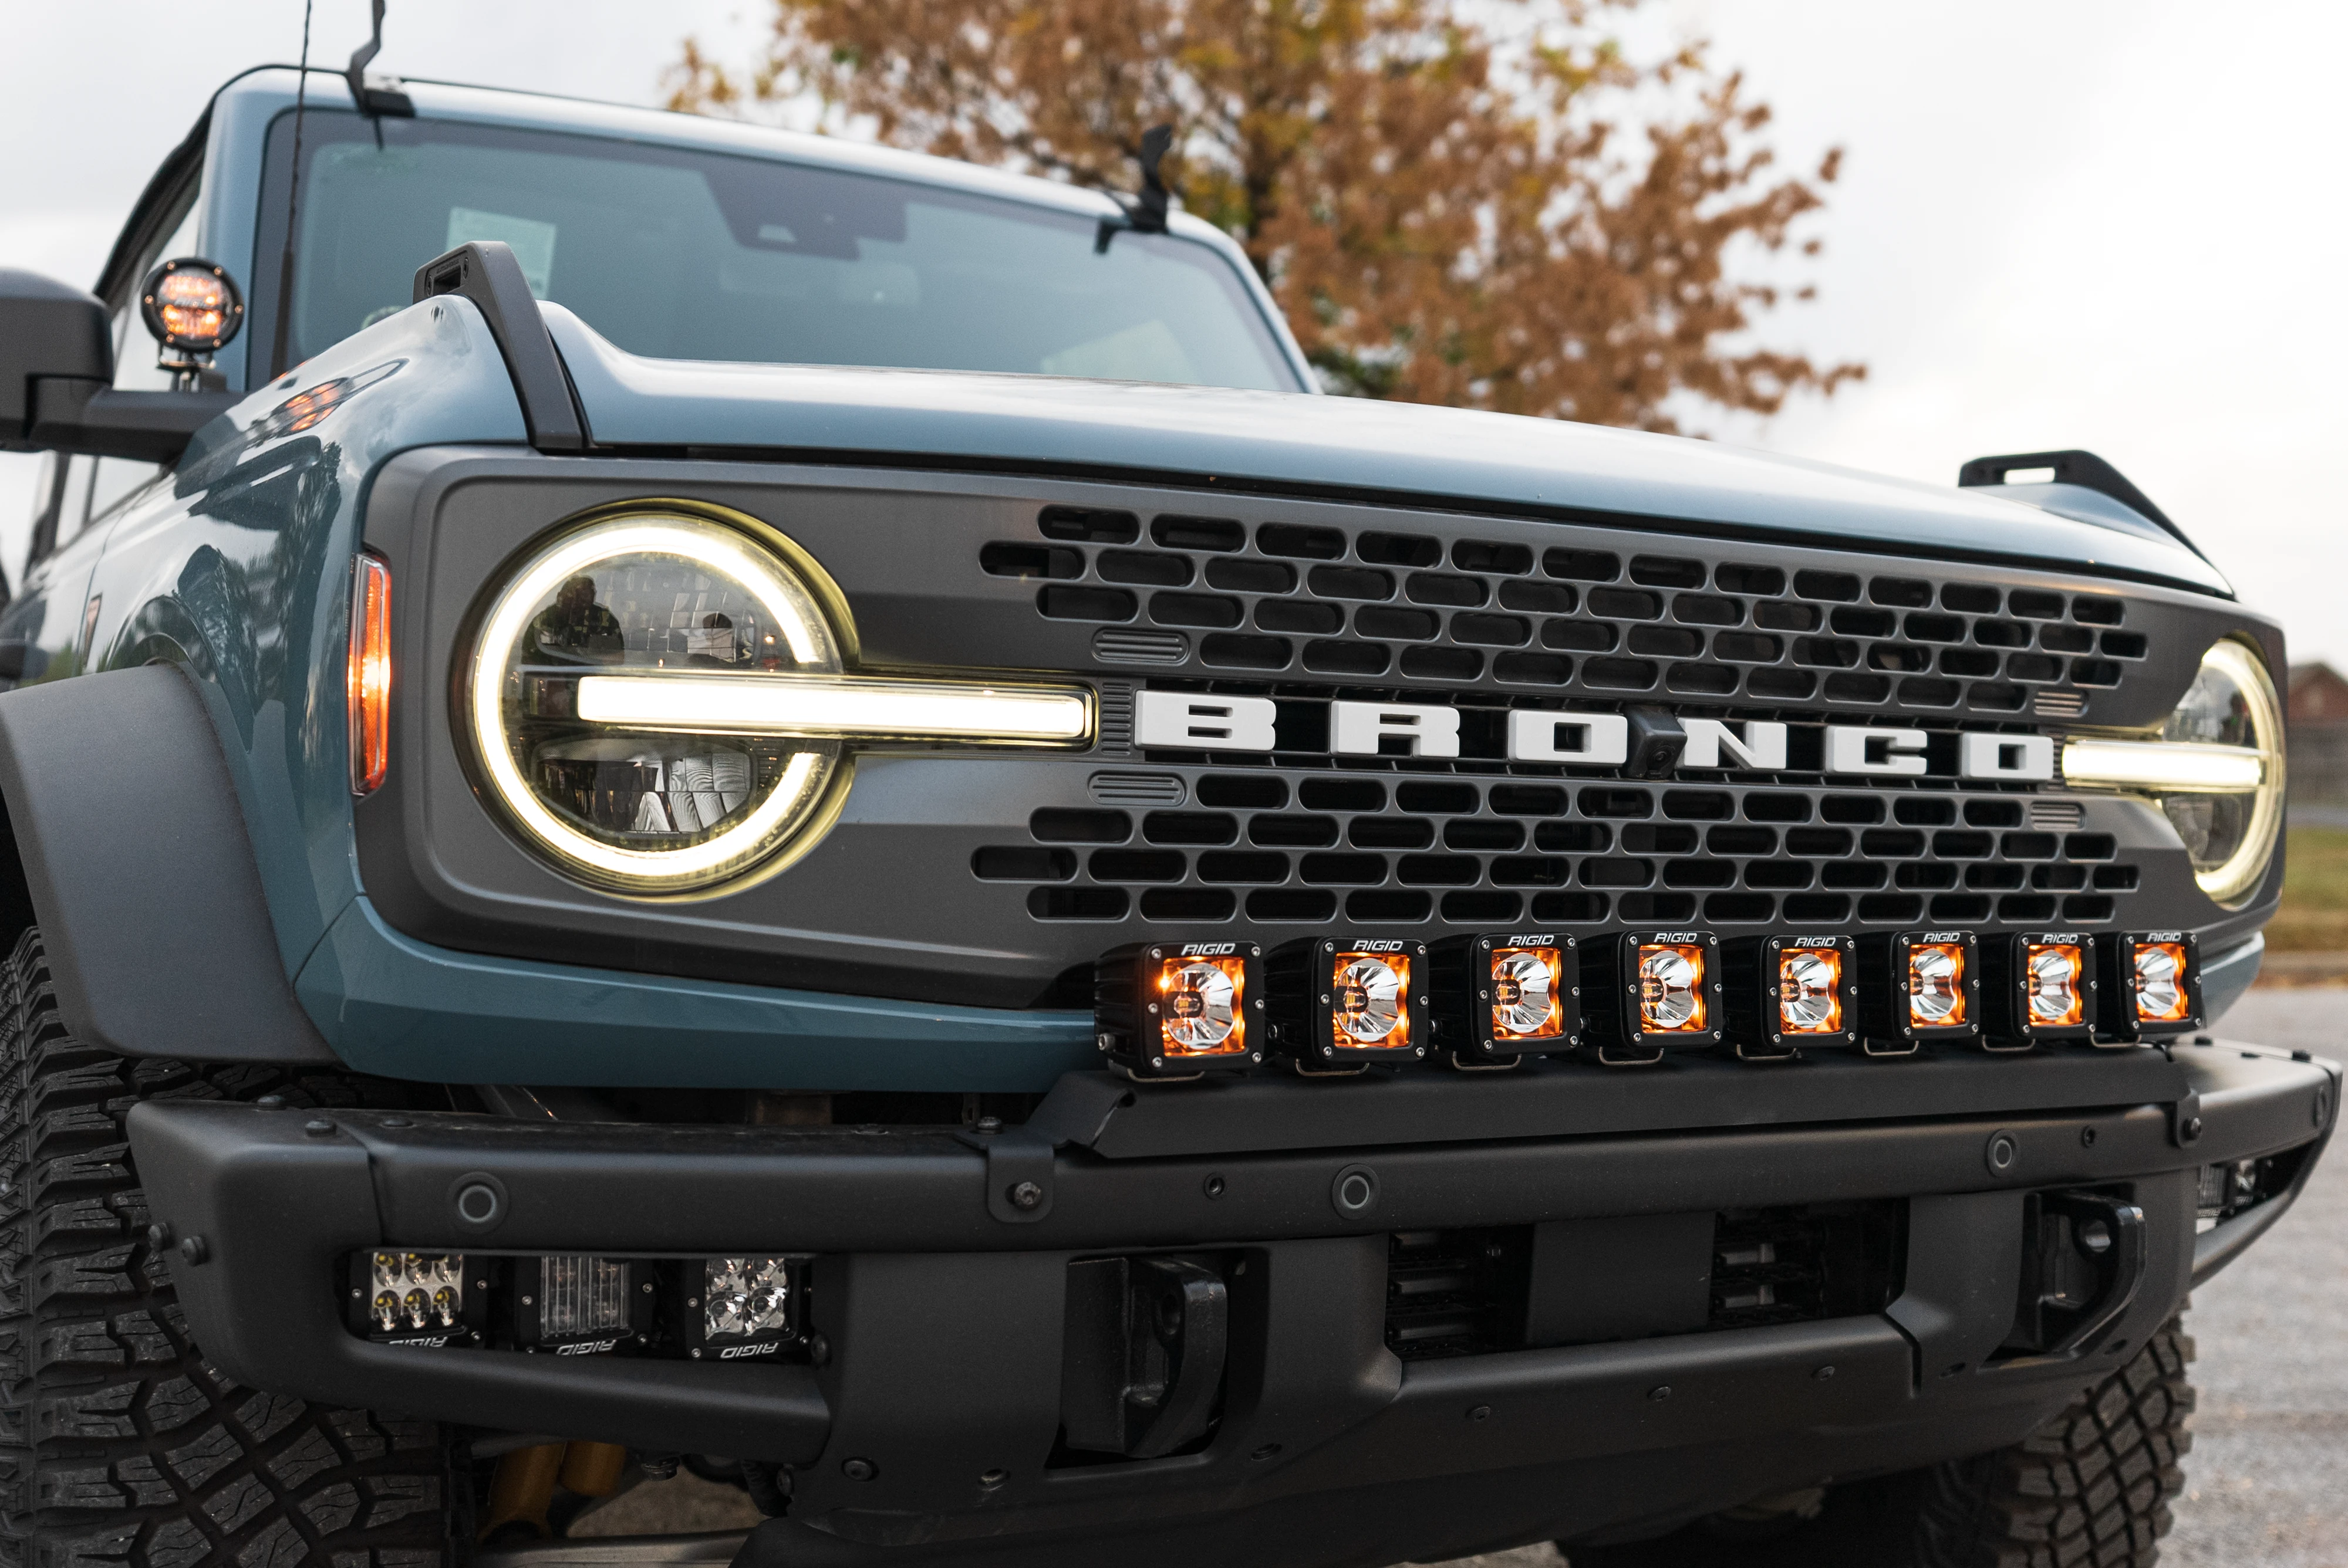 Door Buster - SPV Parts 2021+ Ford Bronco Modular Bumper Universal Slotted Cross Mount (Fits MANY lights)